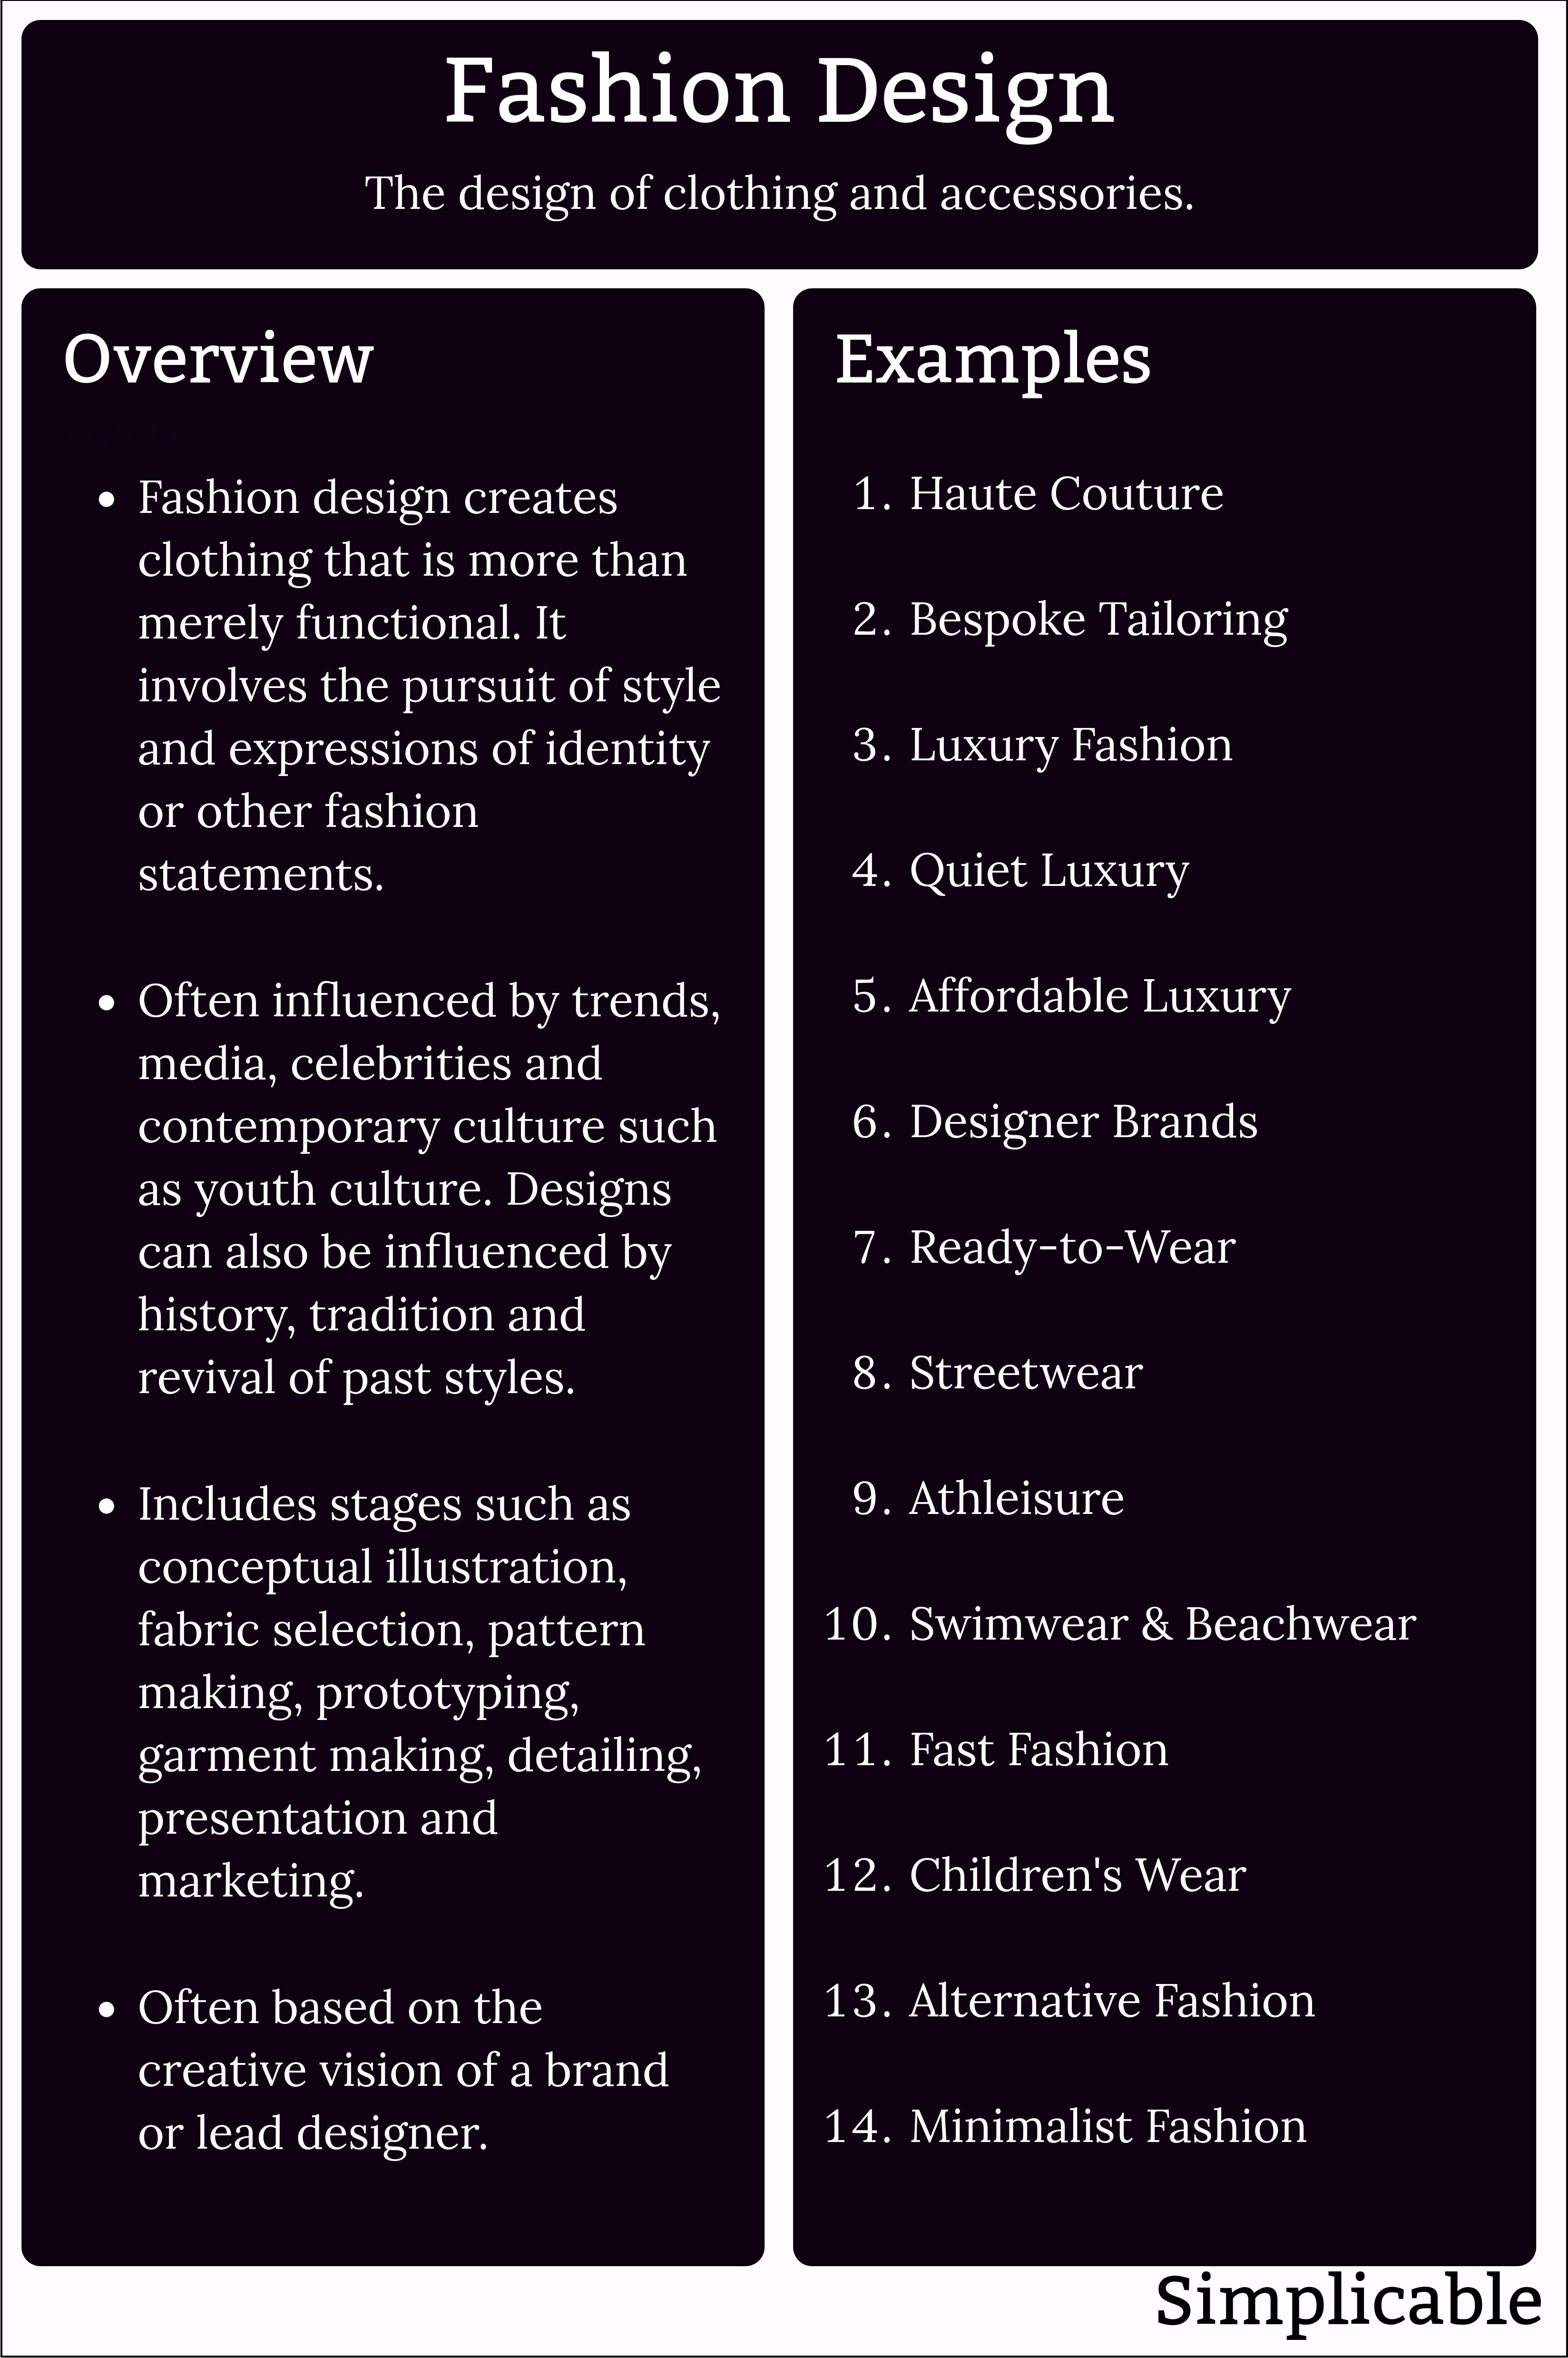 fashion design overview and examples